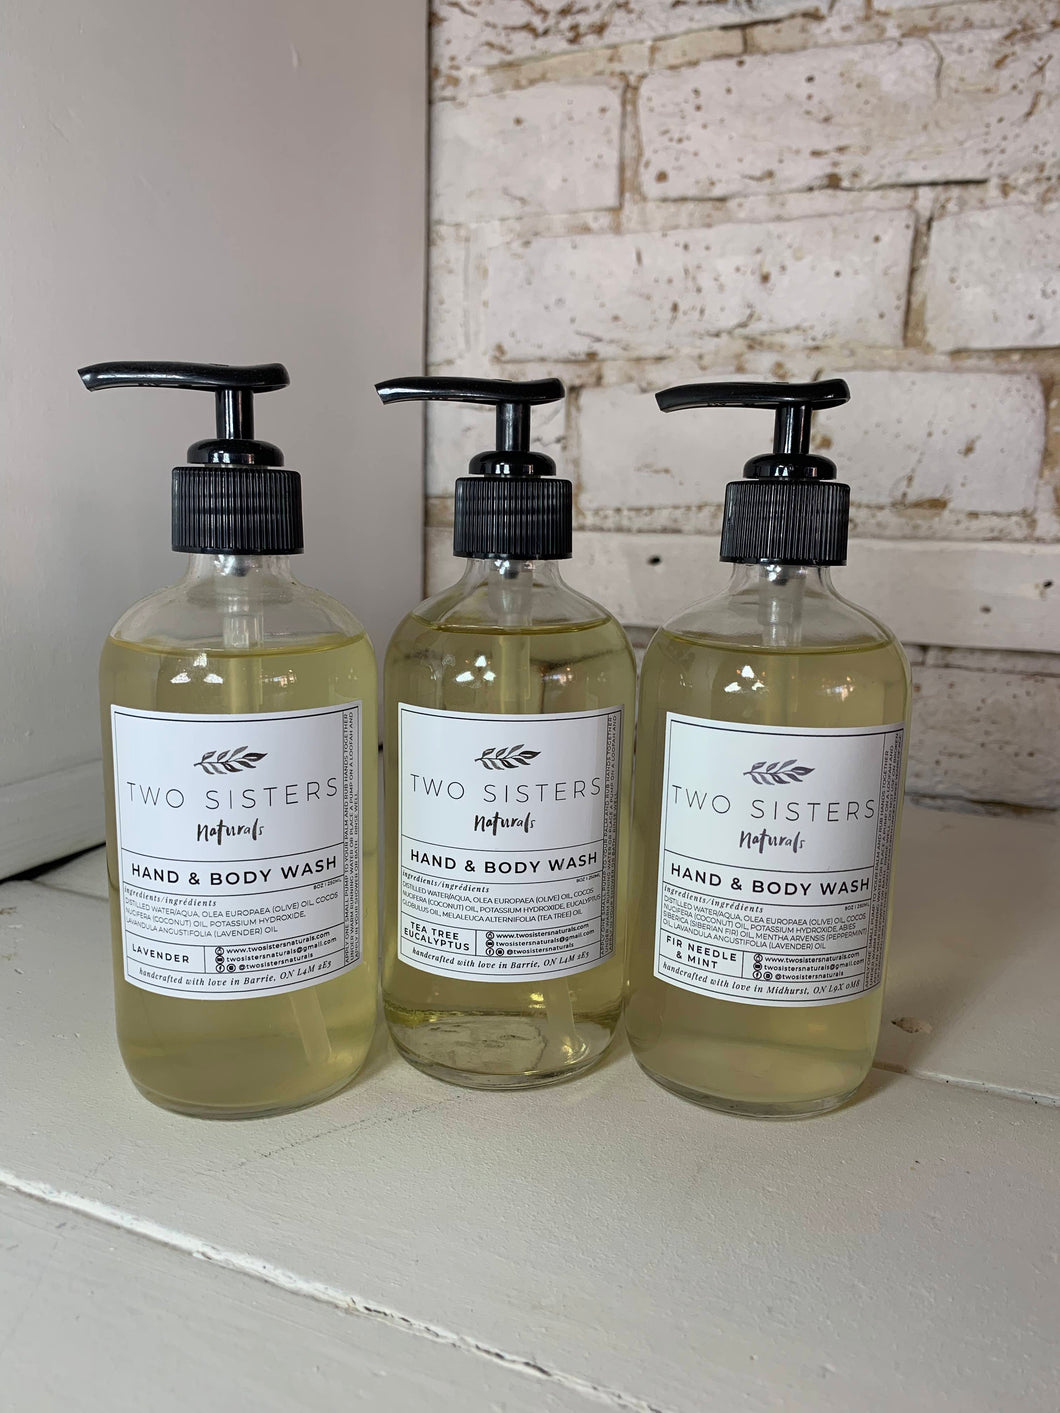 Two Sisters Naturals Hand & Body Wash